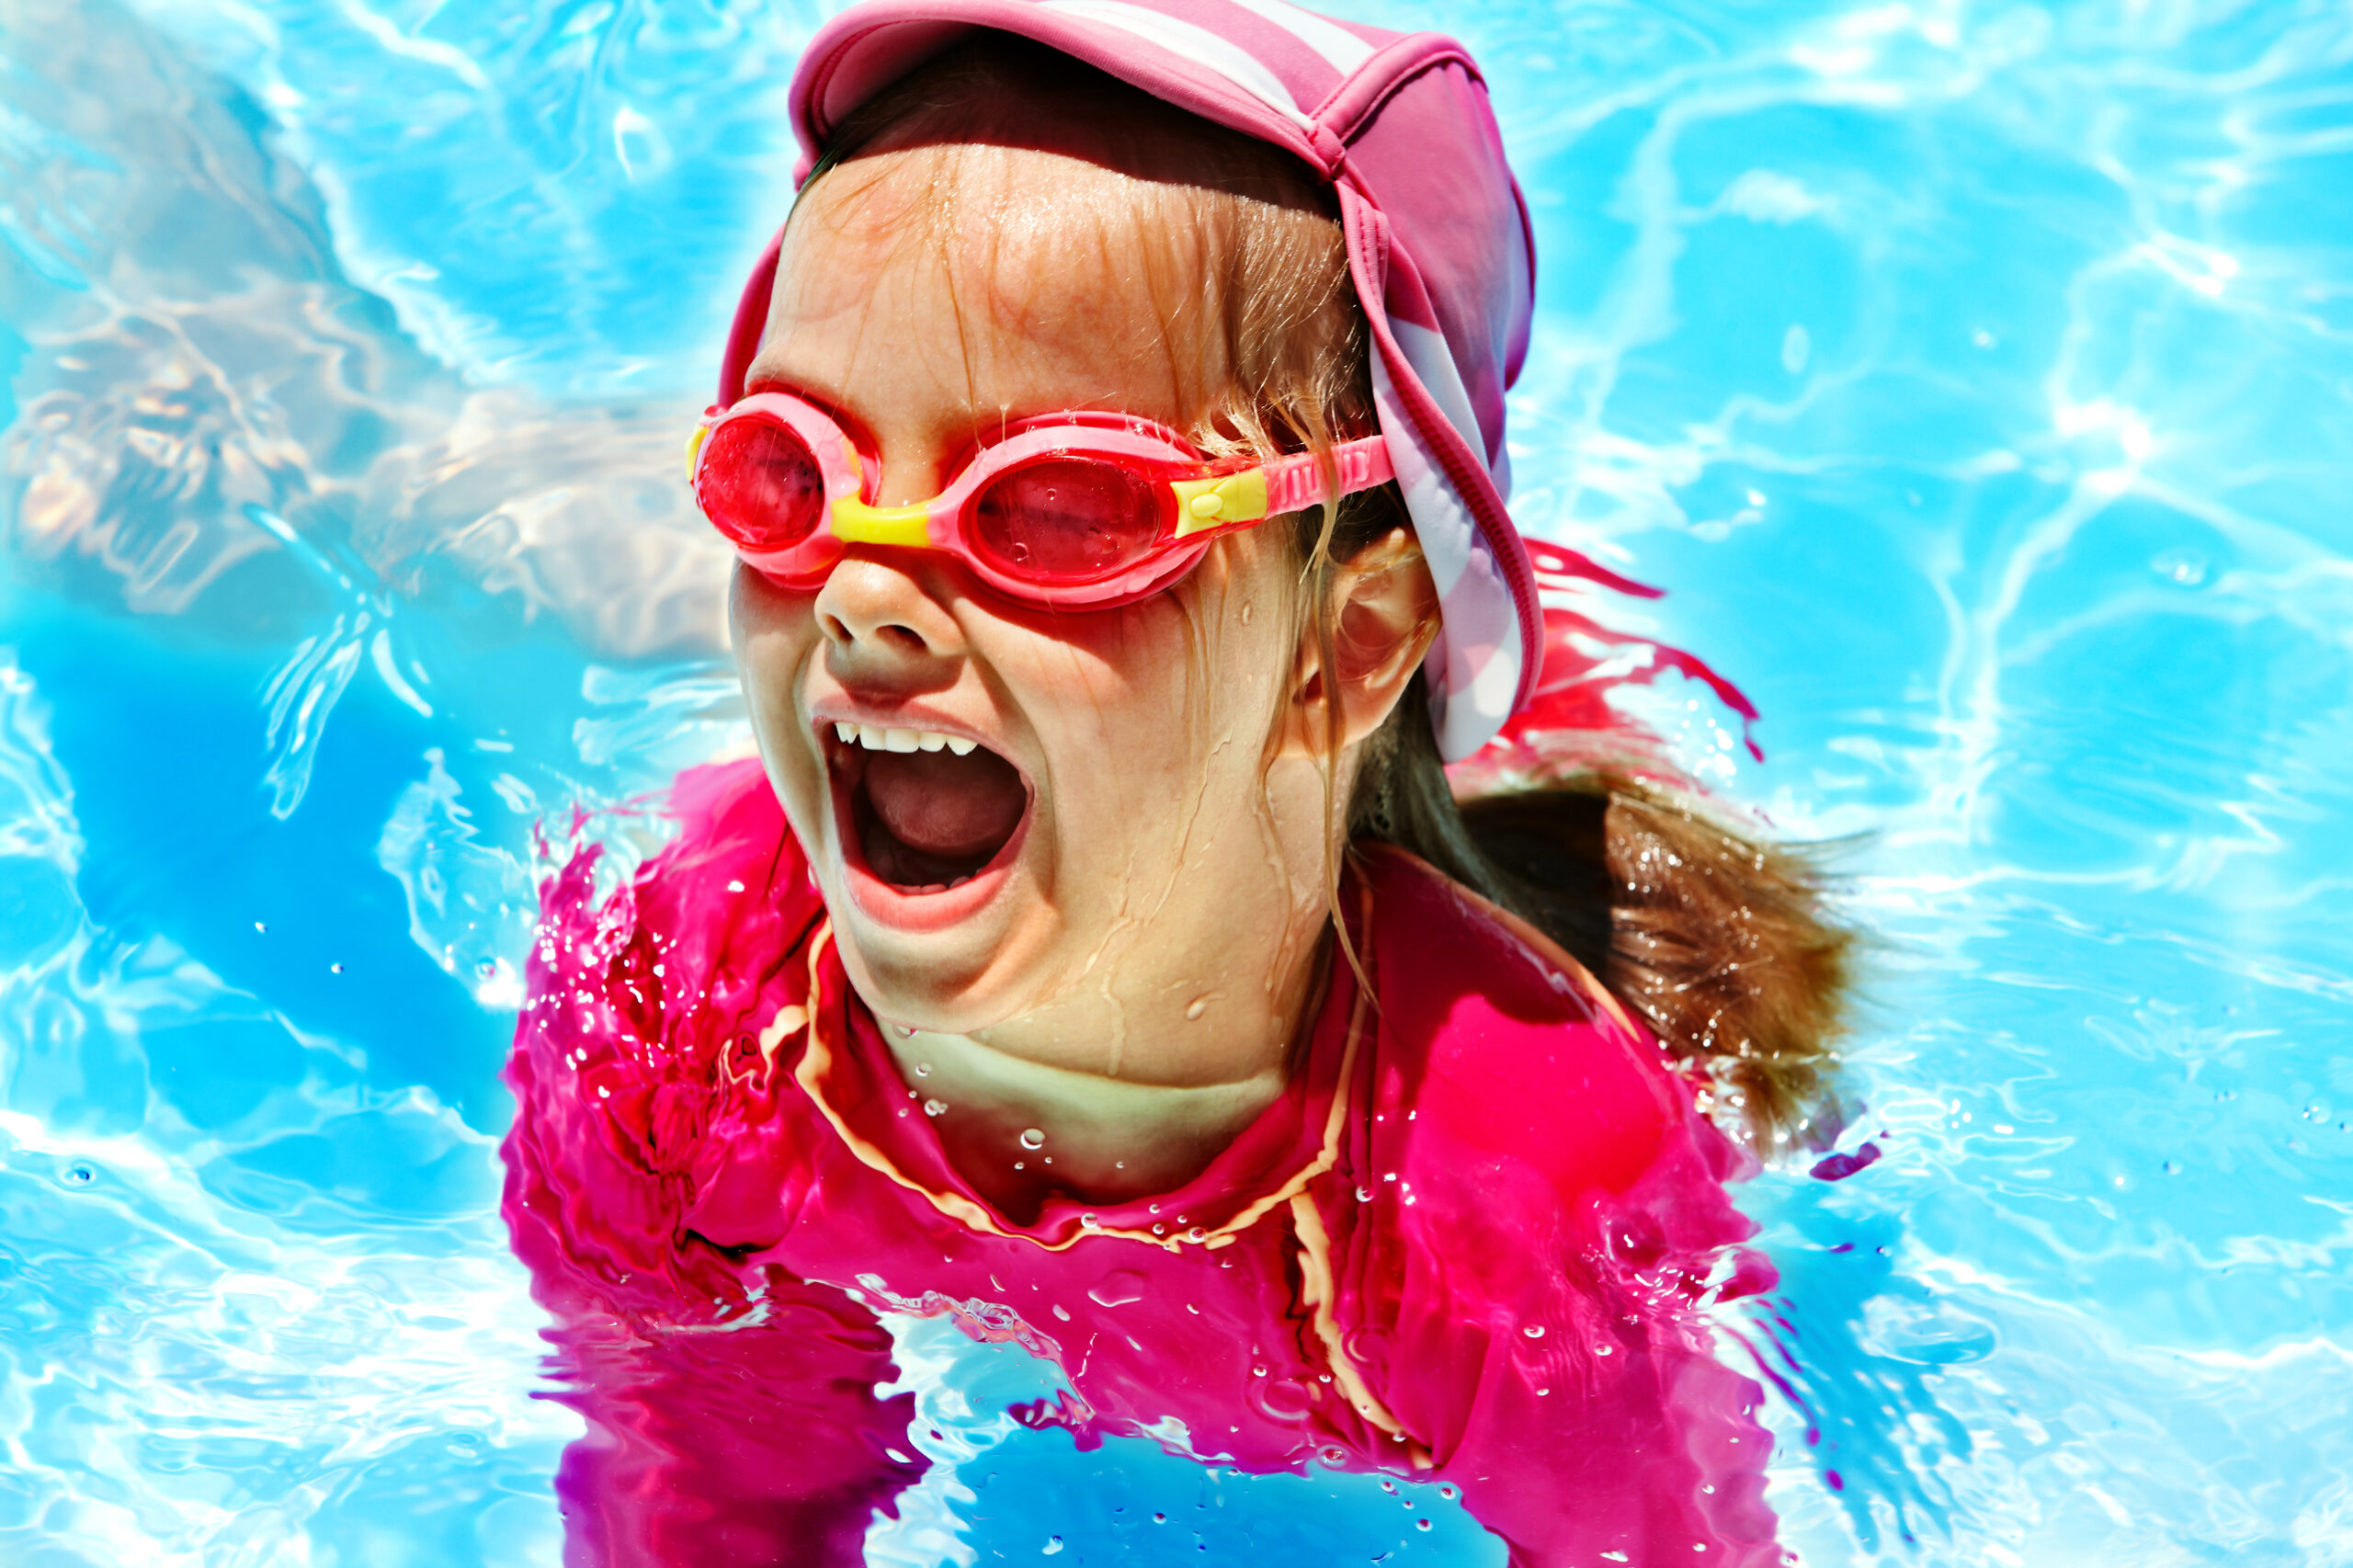 A happy child in a pool, smiling and enjoying a playful and joyful moment in the water.